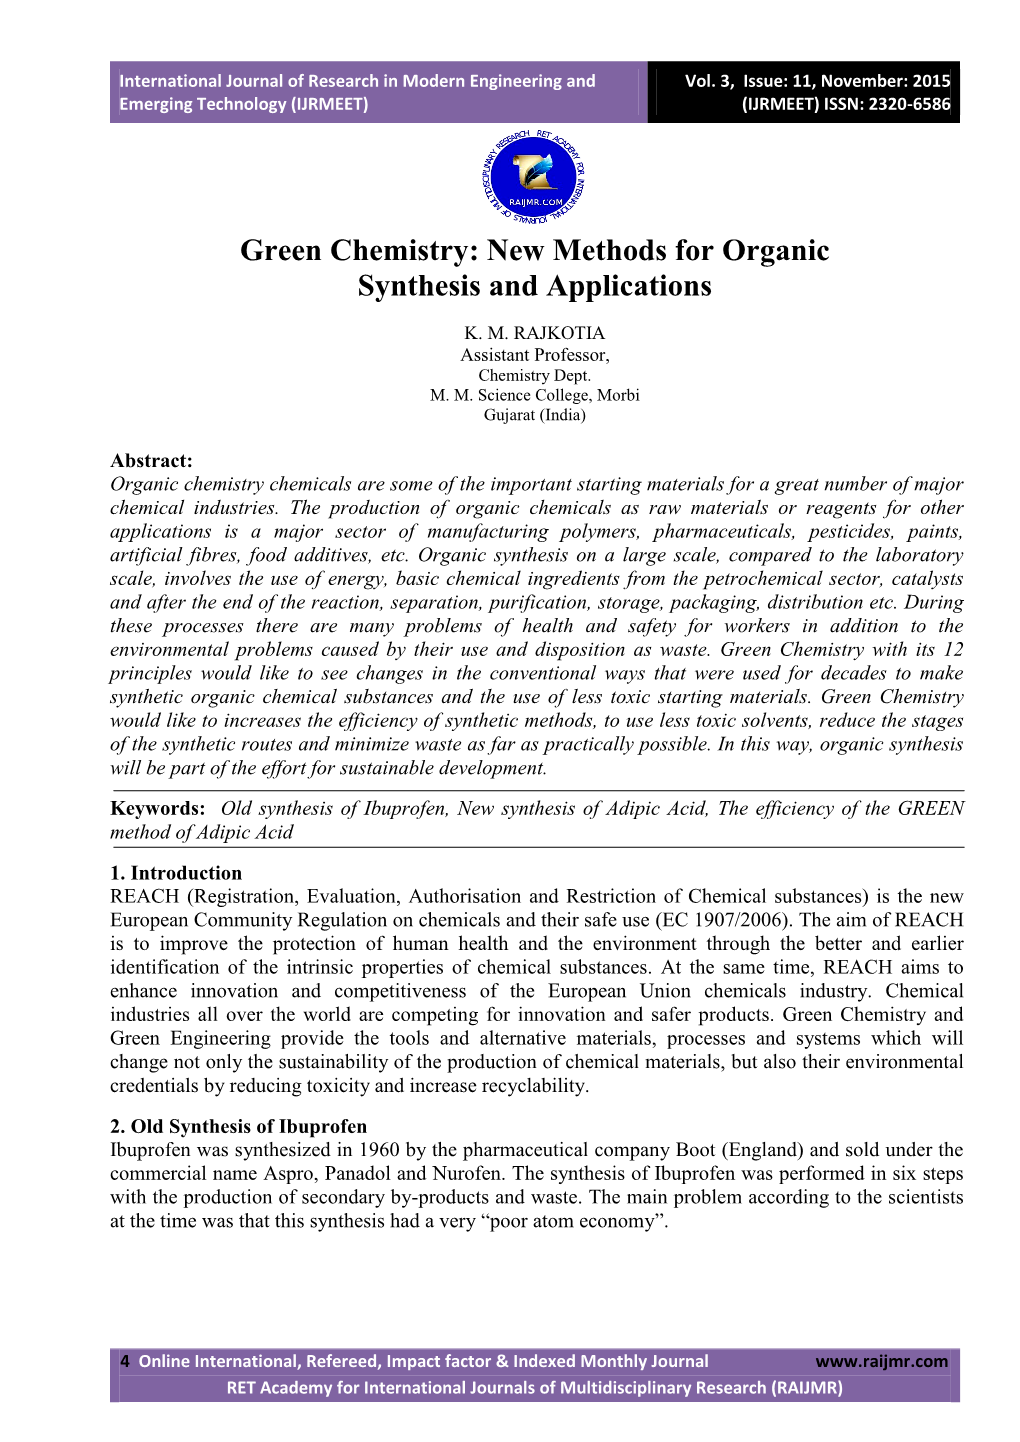 Green Chemistry: New Methods for Organic Synthesis and Applications